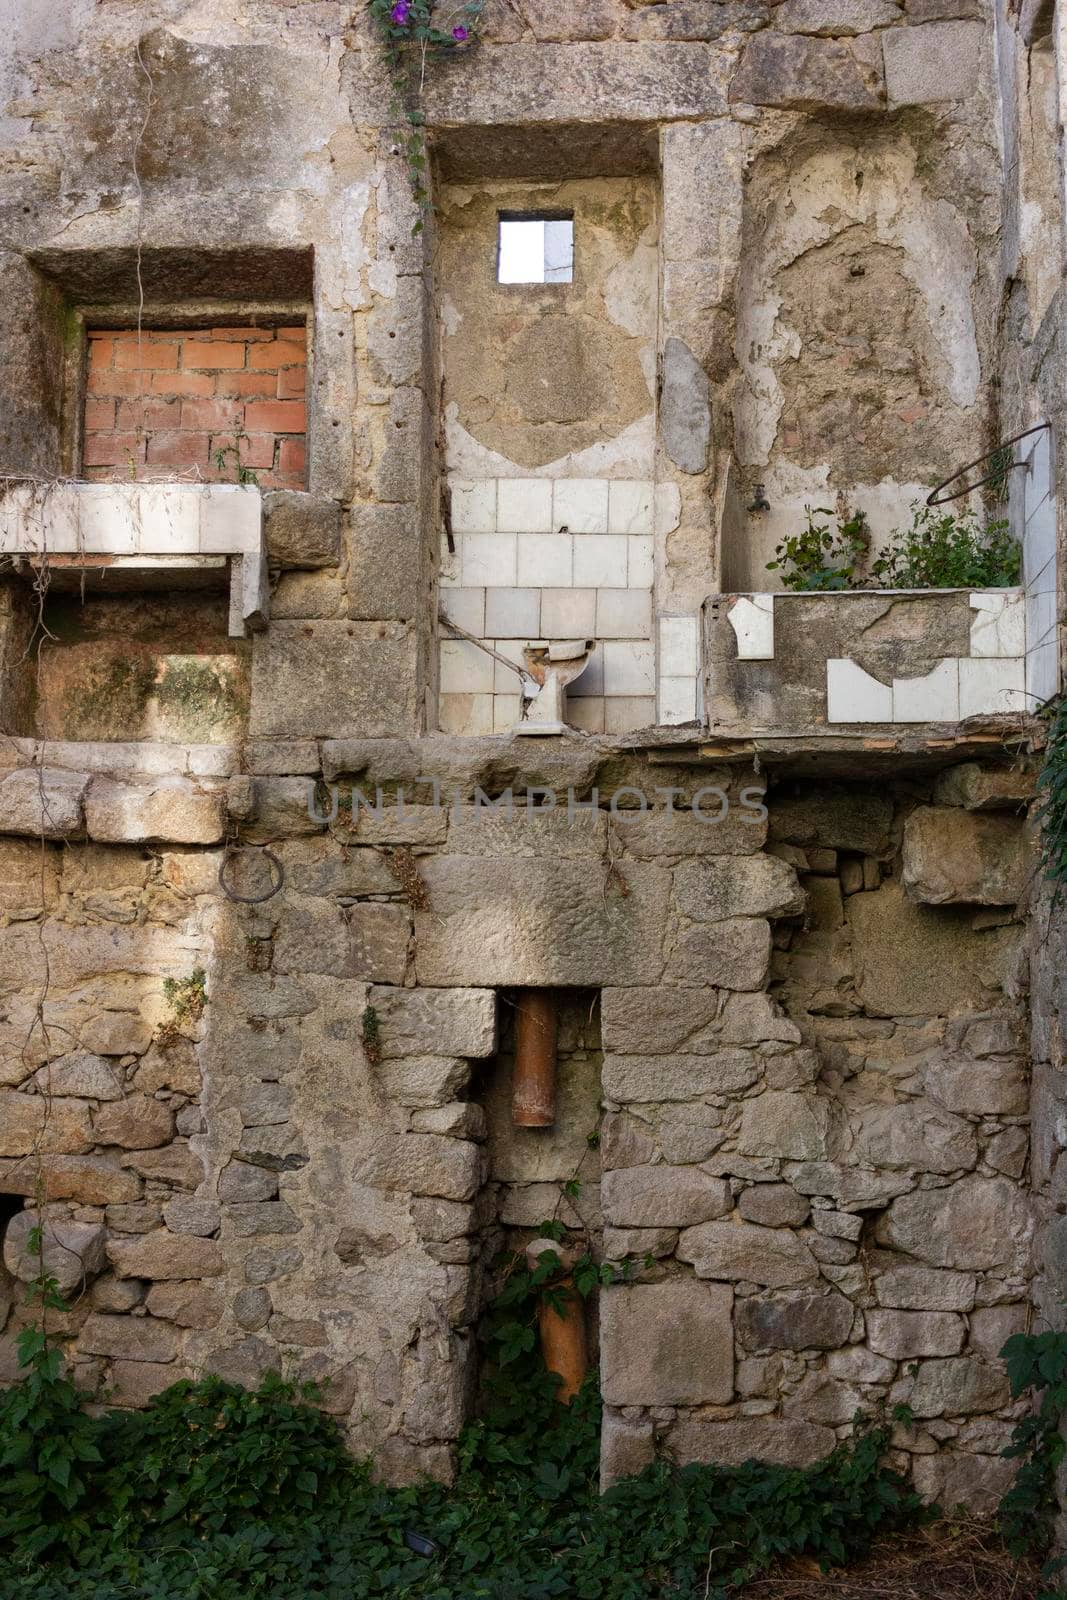 Dilapidated stone house, with exposed toilet by loopneo